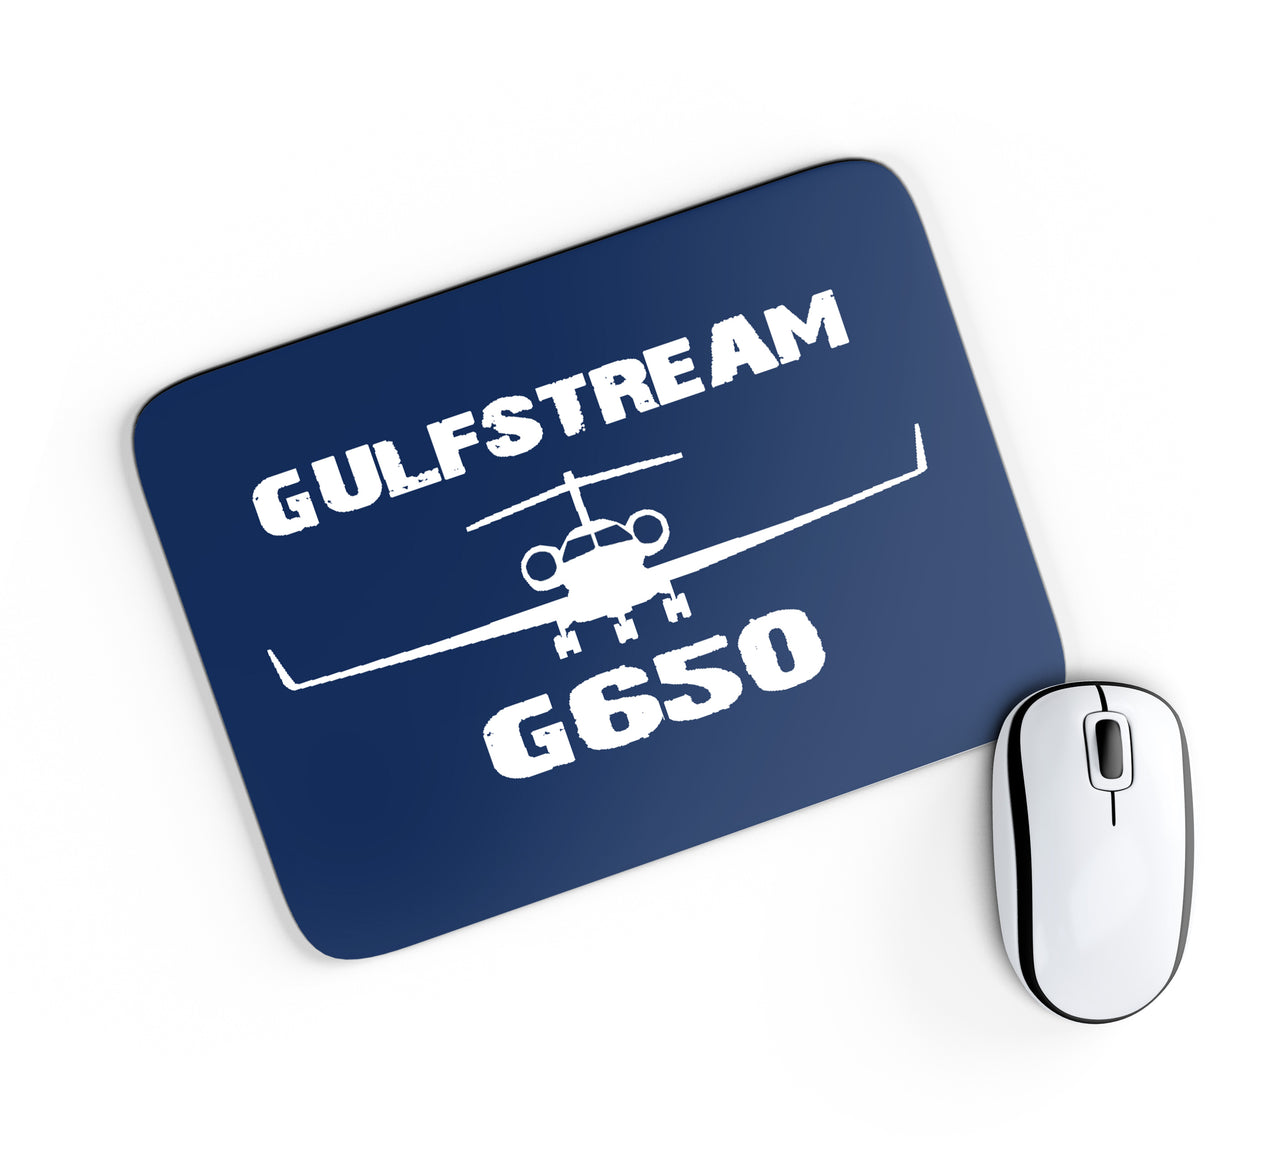 Gulfstream G650 & Plane Designed Mouse Pads